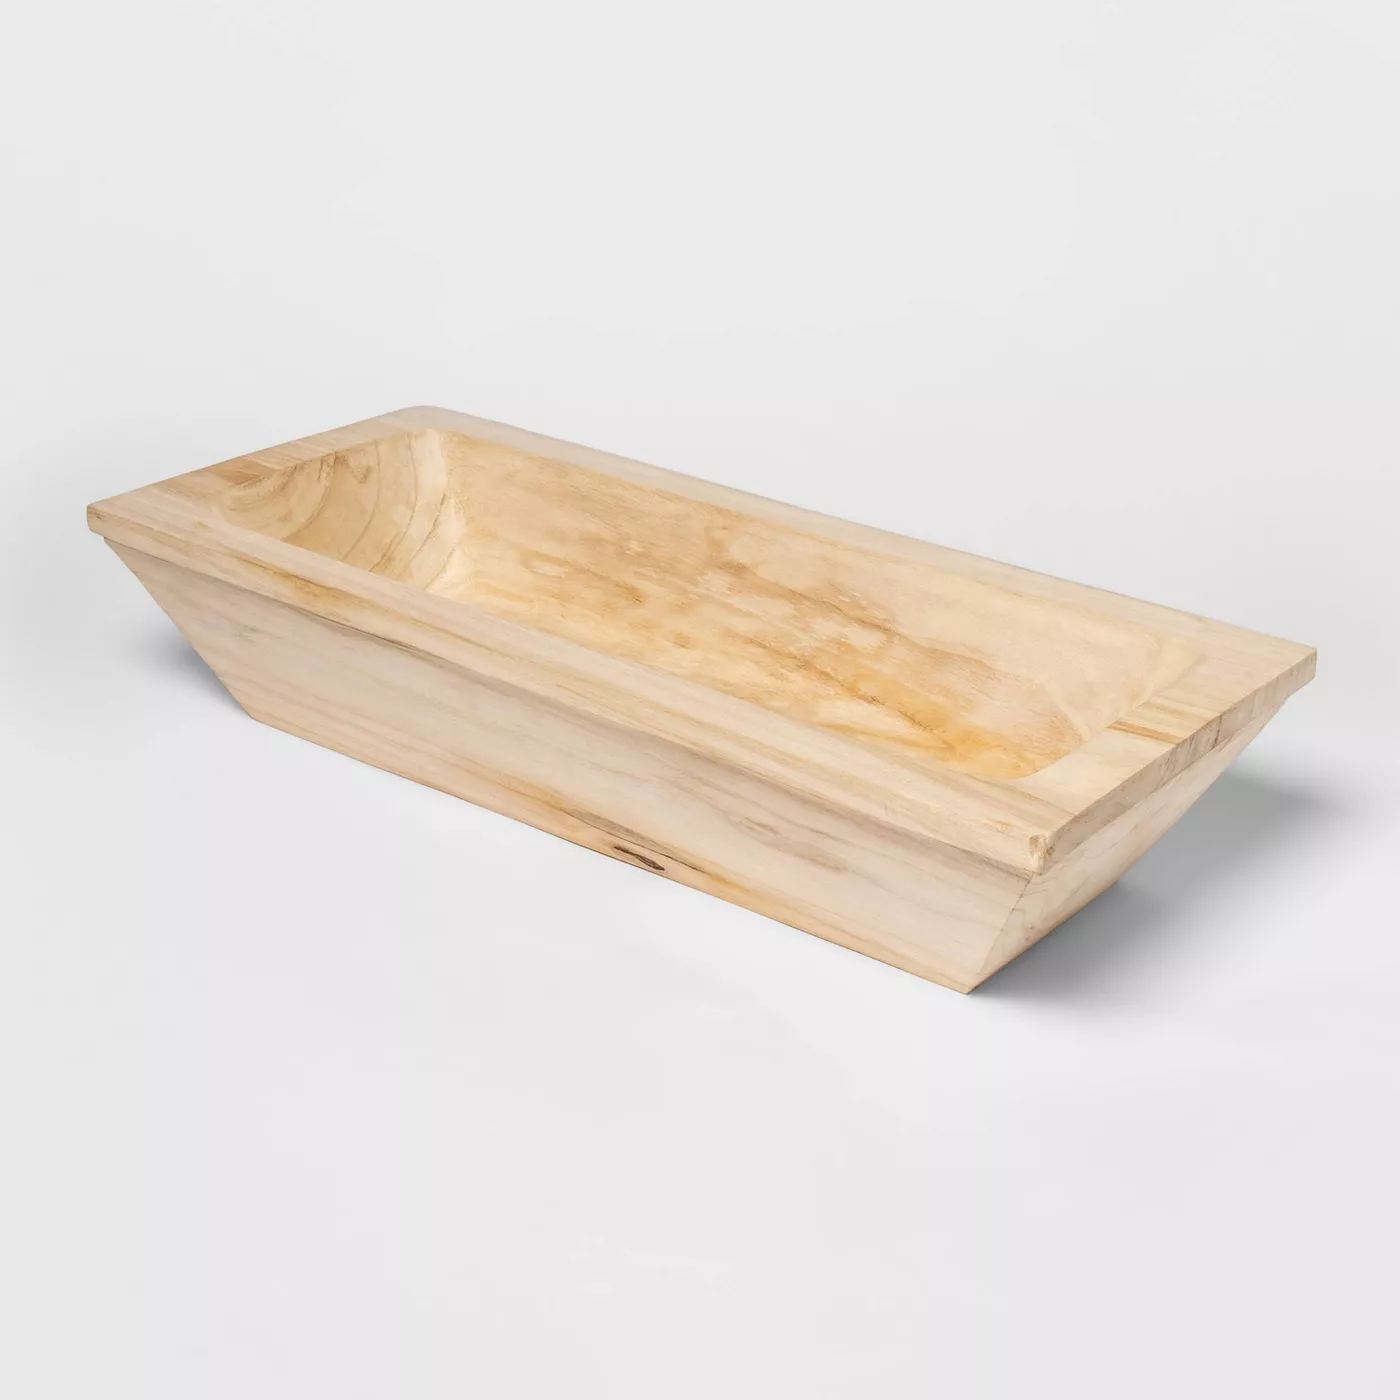 Shop 23.8" x 11" Wooden Rectangle Bowl Natural - Threshold from Target on Openhaus